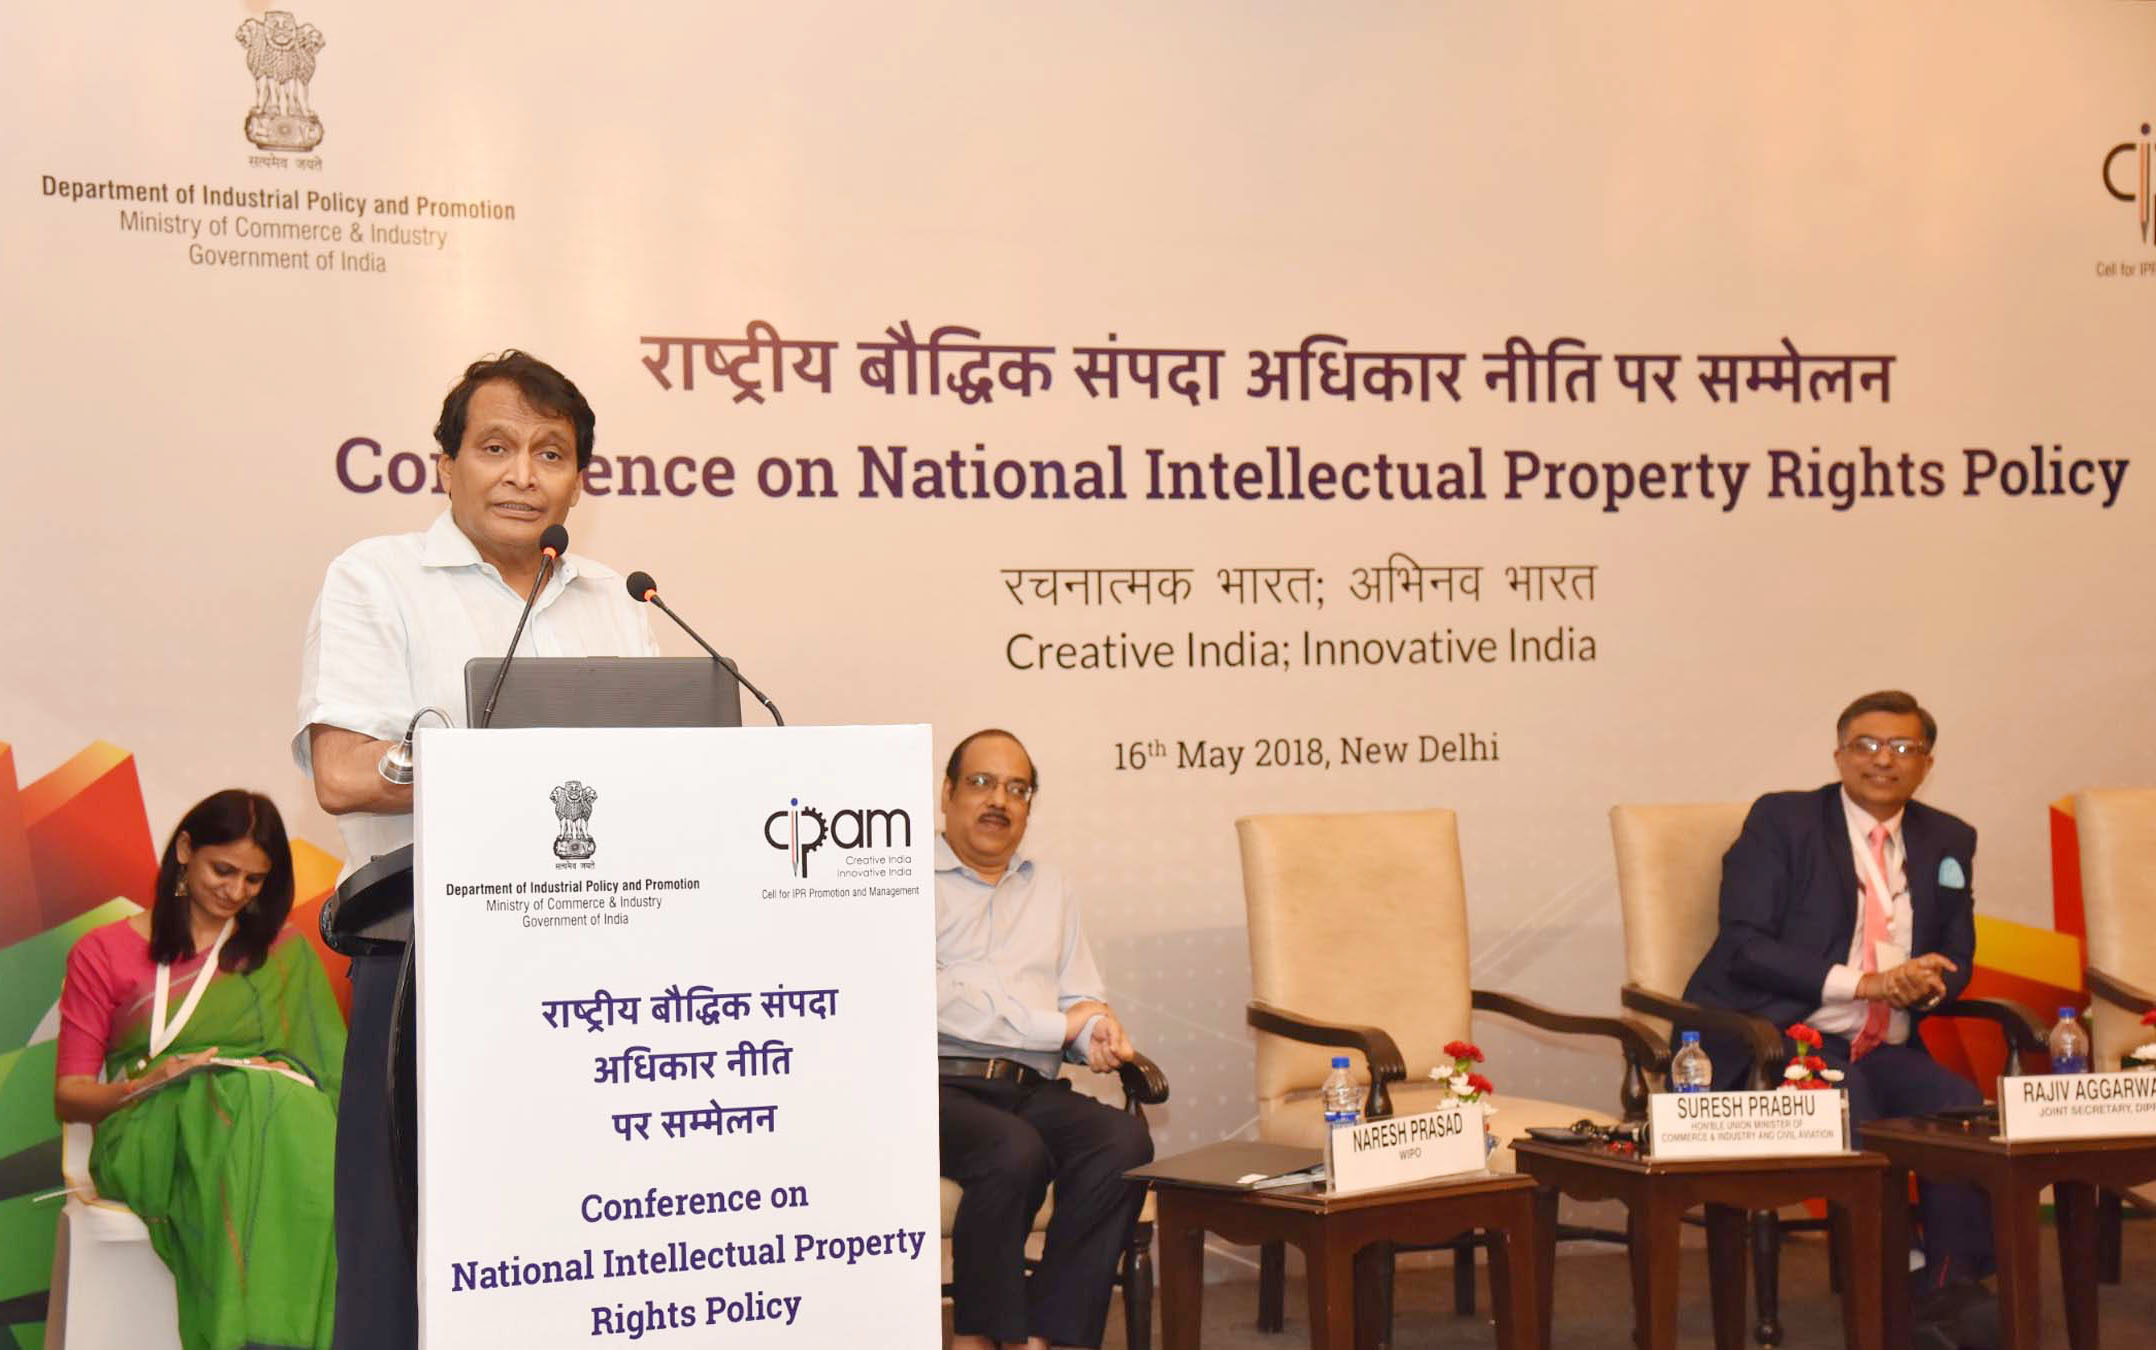 The Union Minister for Commerce & Industry and Civil Aviation, Shri Suresh Prabhakar Prabhu addressing the Conference on National IPR Policy, in New Delhi on May 16, 2018.